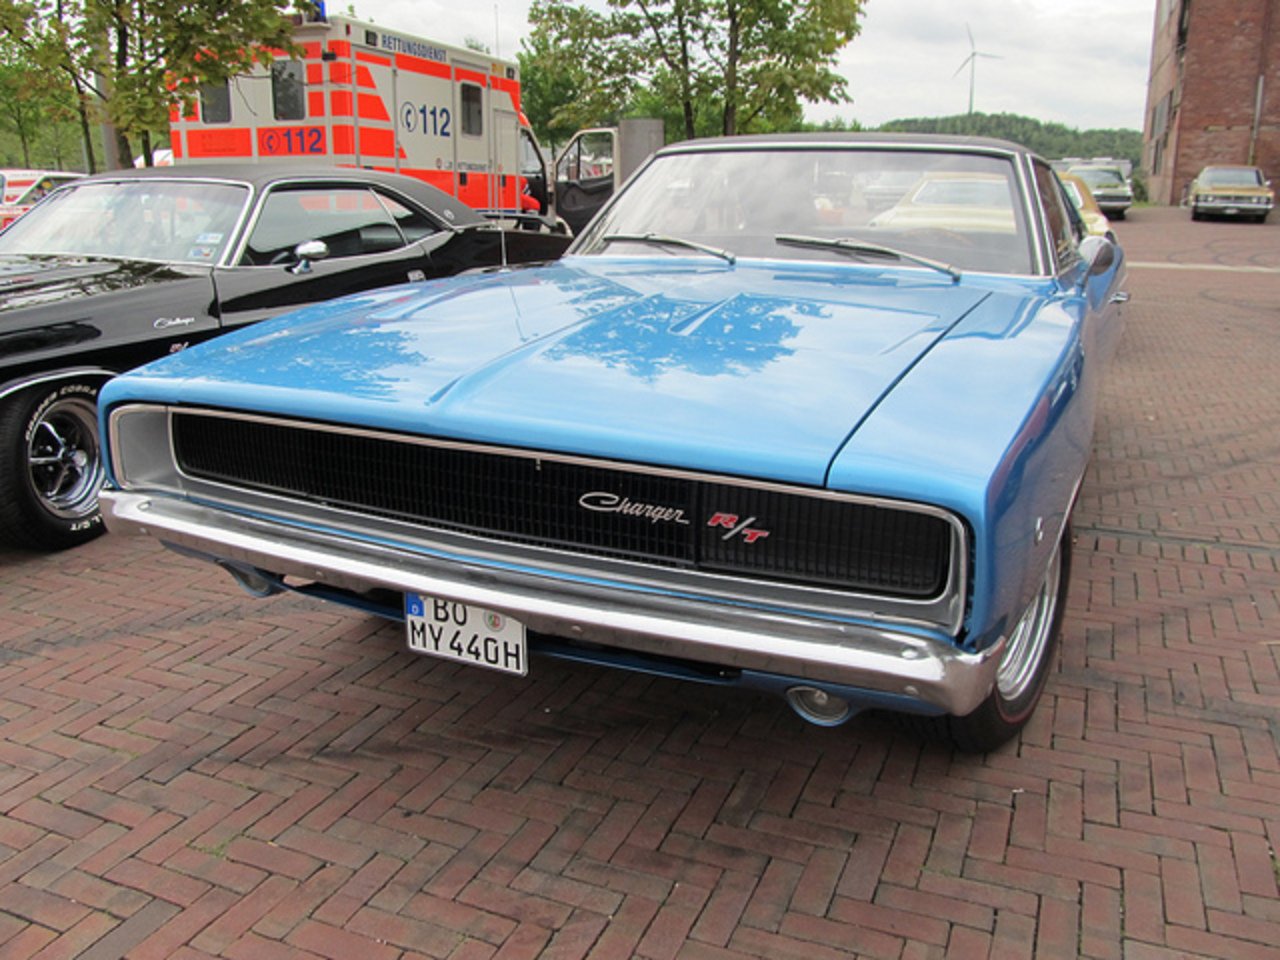 Dodge Charger RT 440 1968 | Flickr - Photo Sharing!